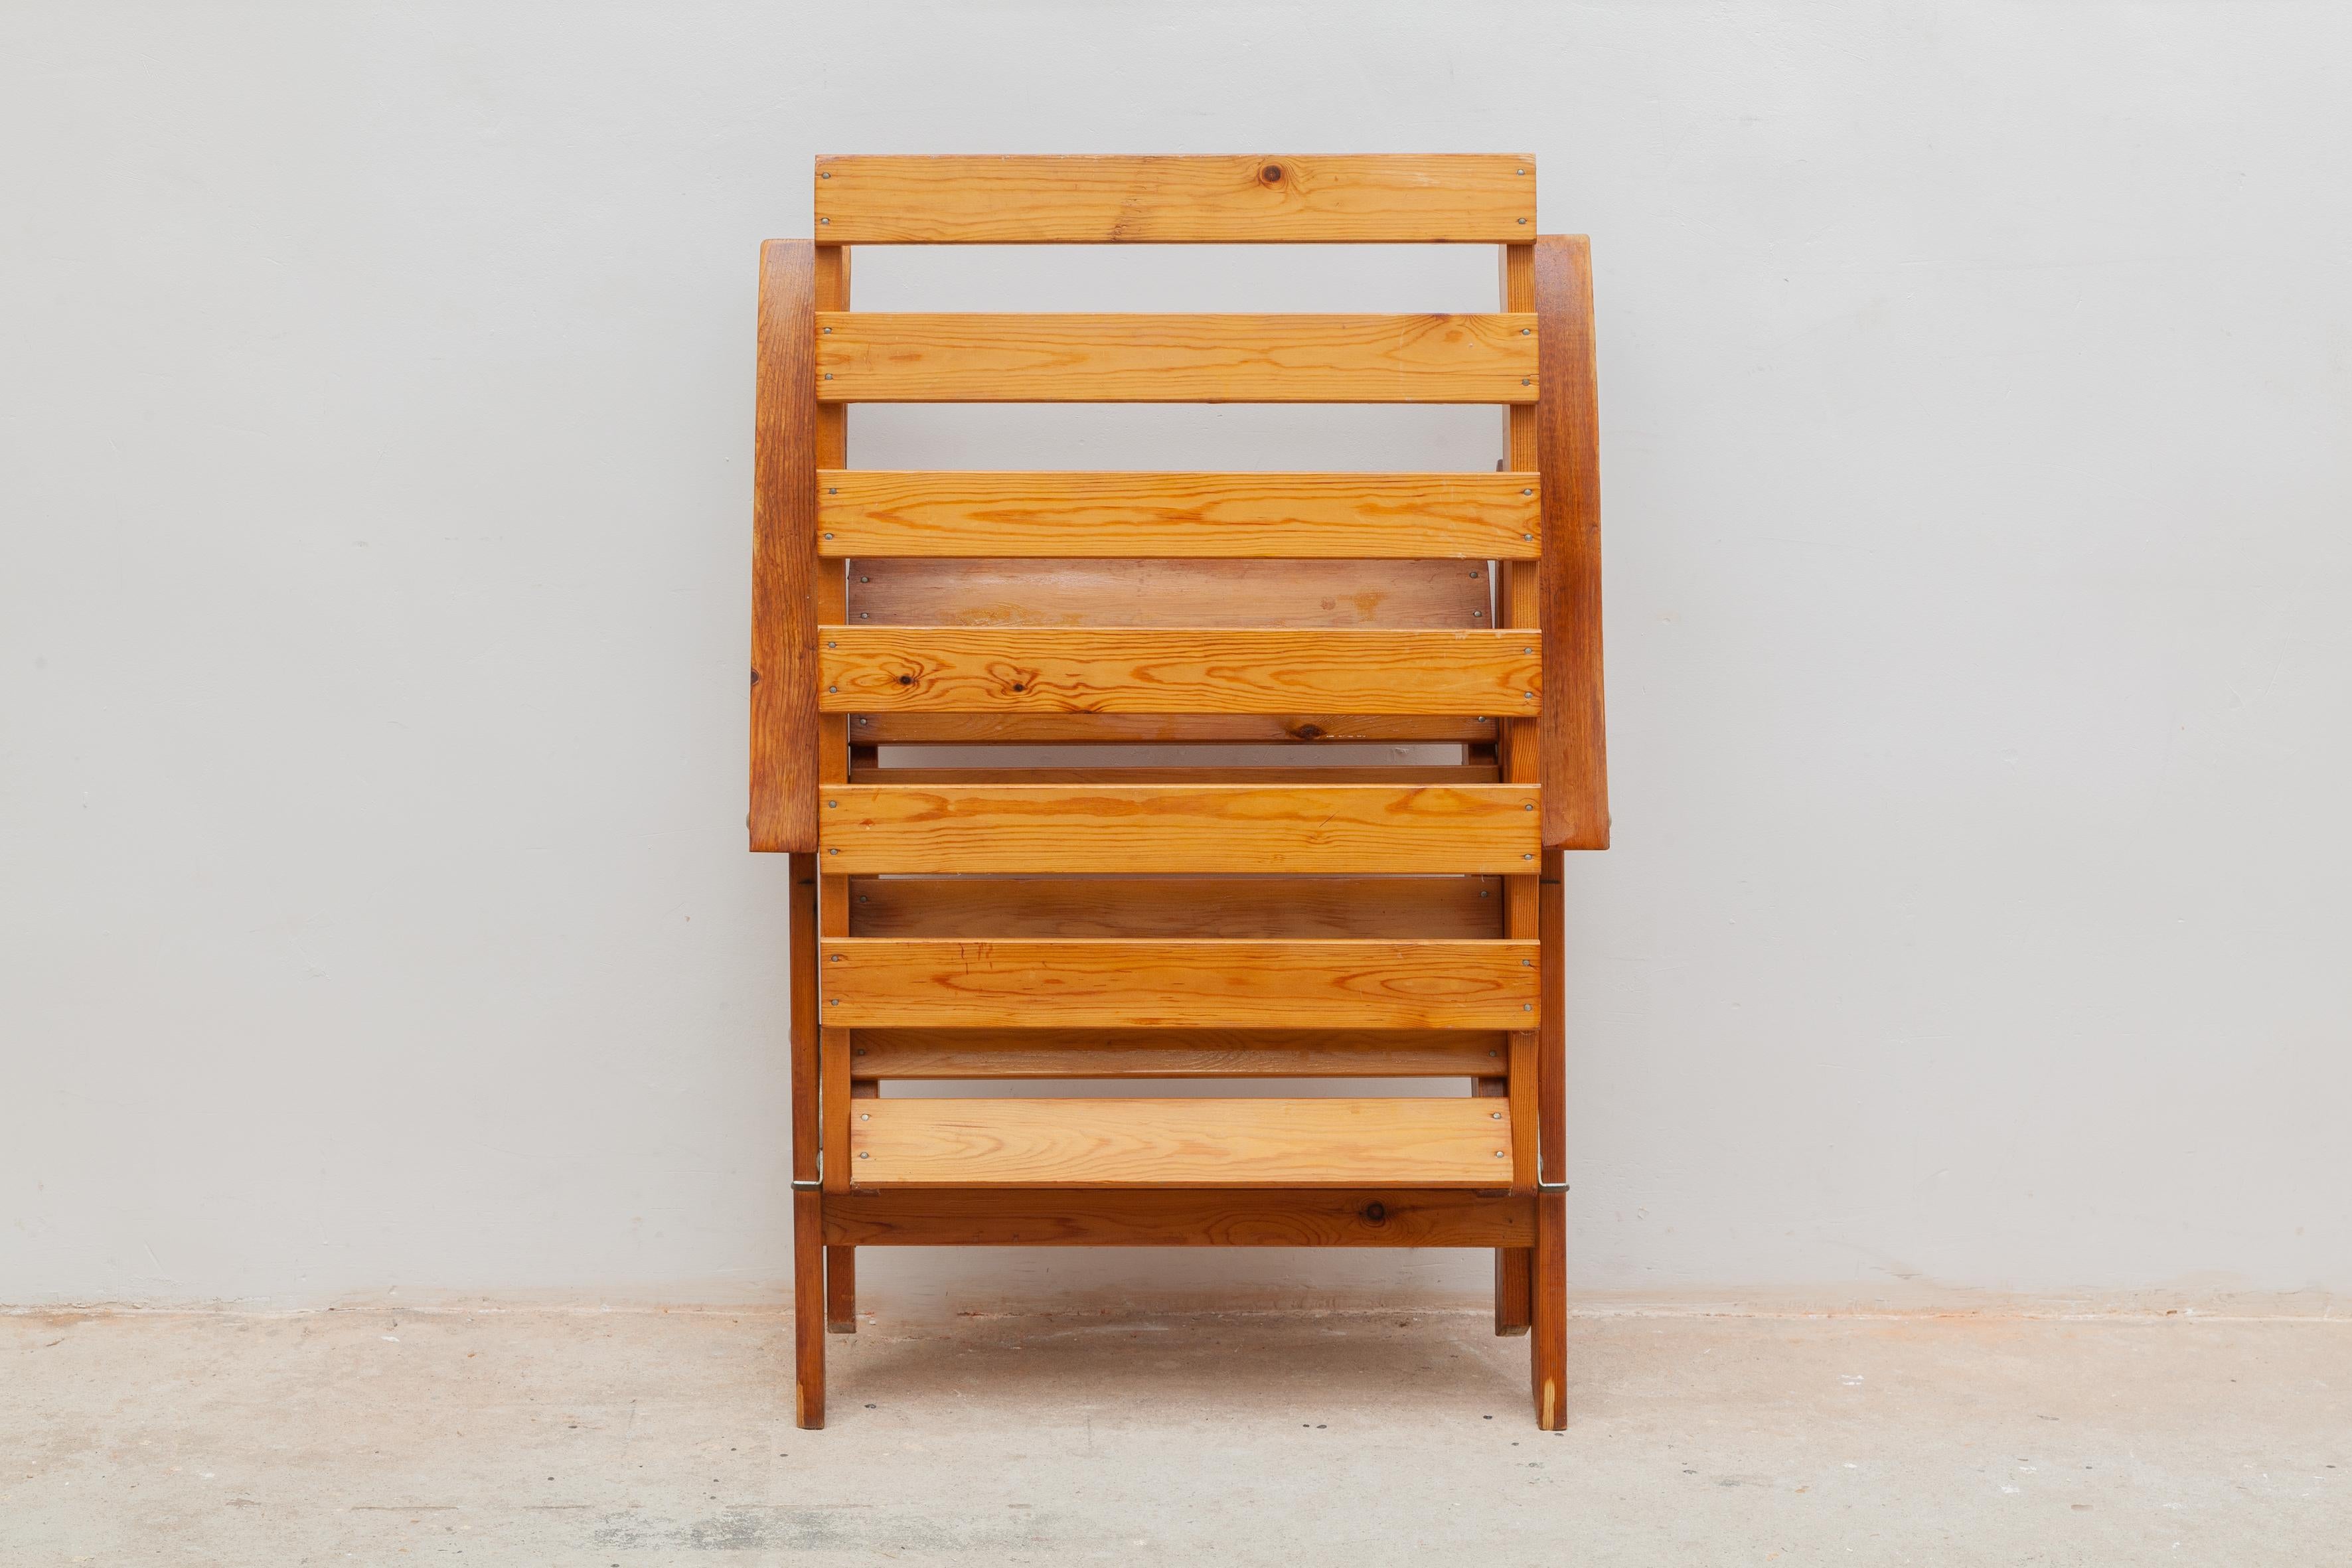 Vintage outdoor chairs. Solid wooden slat construction with armrests. Fold-able for easy storage.
 Dimensions: 63 W x 97 H x 78 D cm, seat 42 cm high.